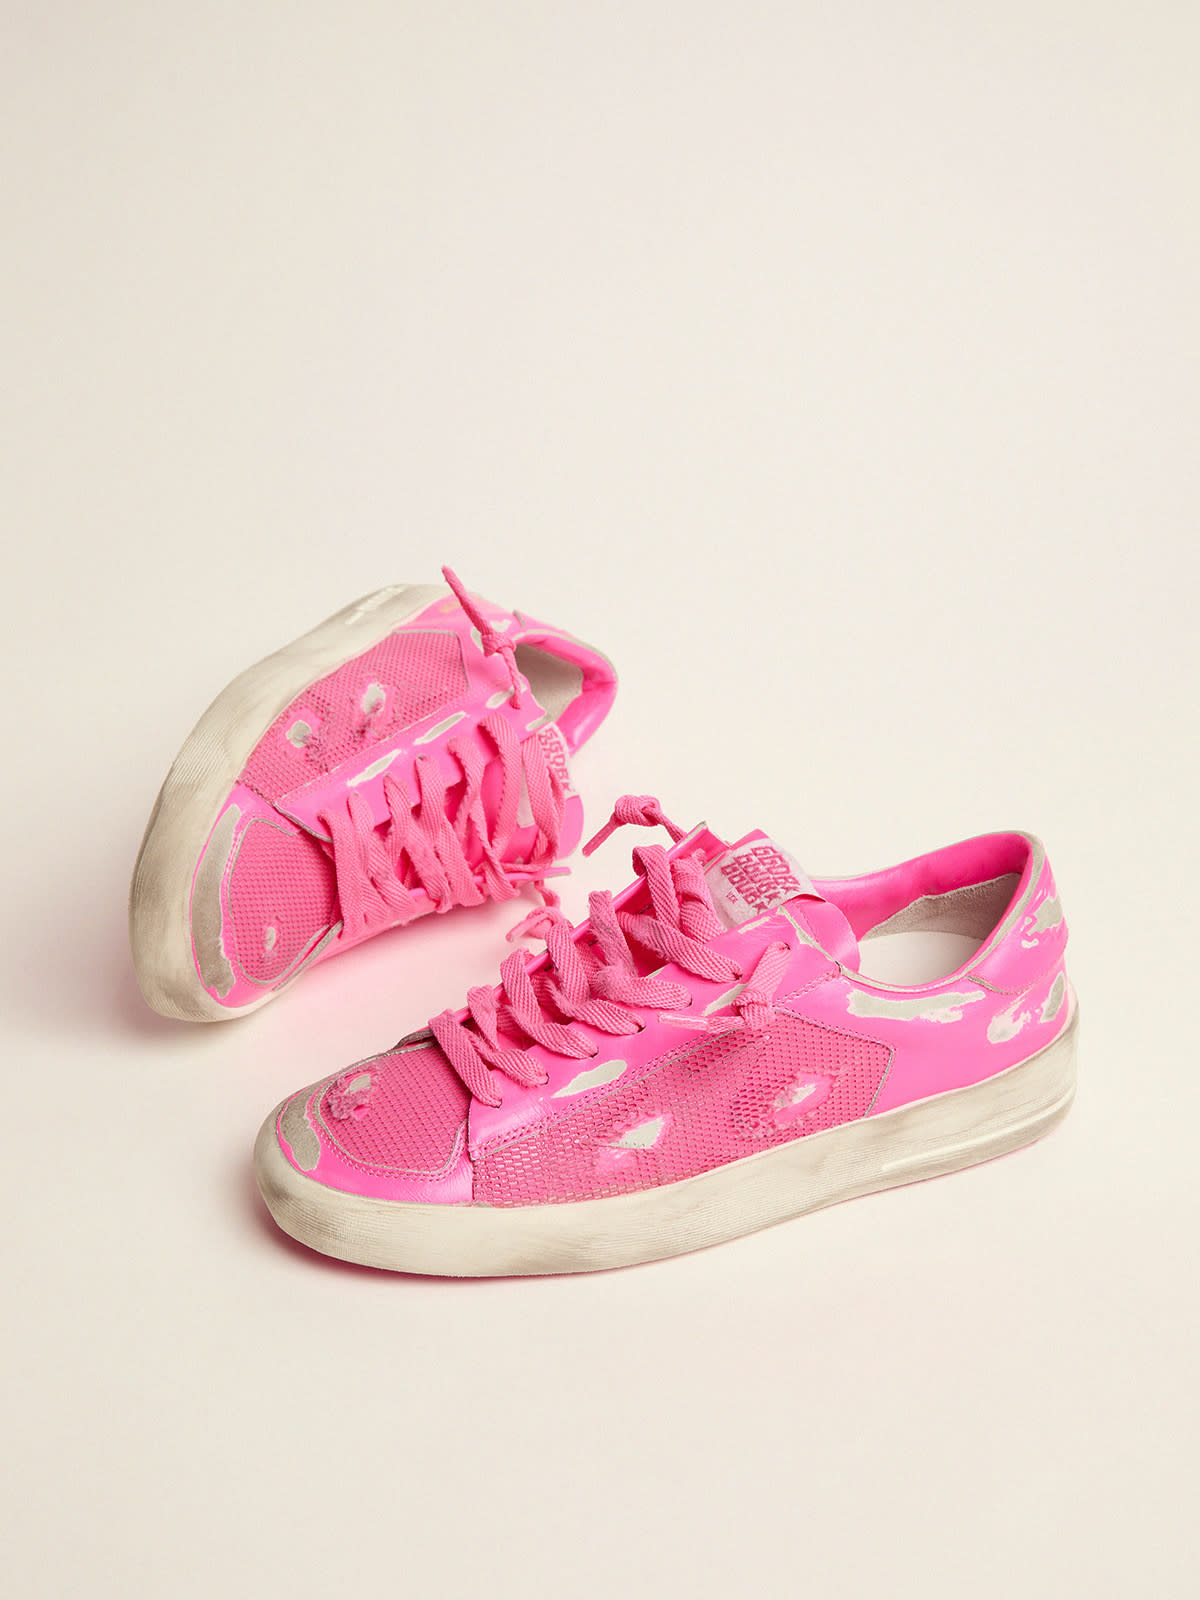 Women\'s Stardan sneakers in fluorescent pink leather and mesh | Golden Goose